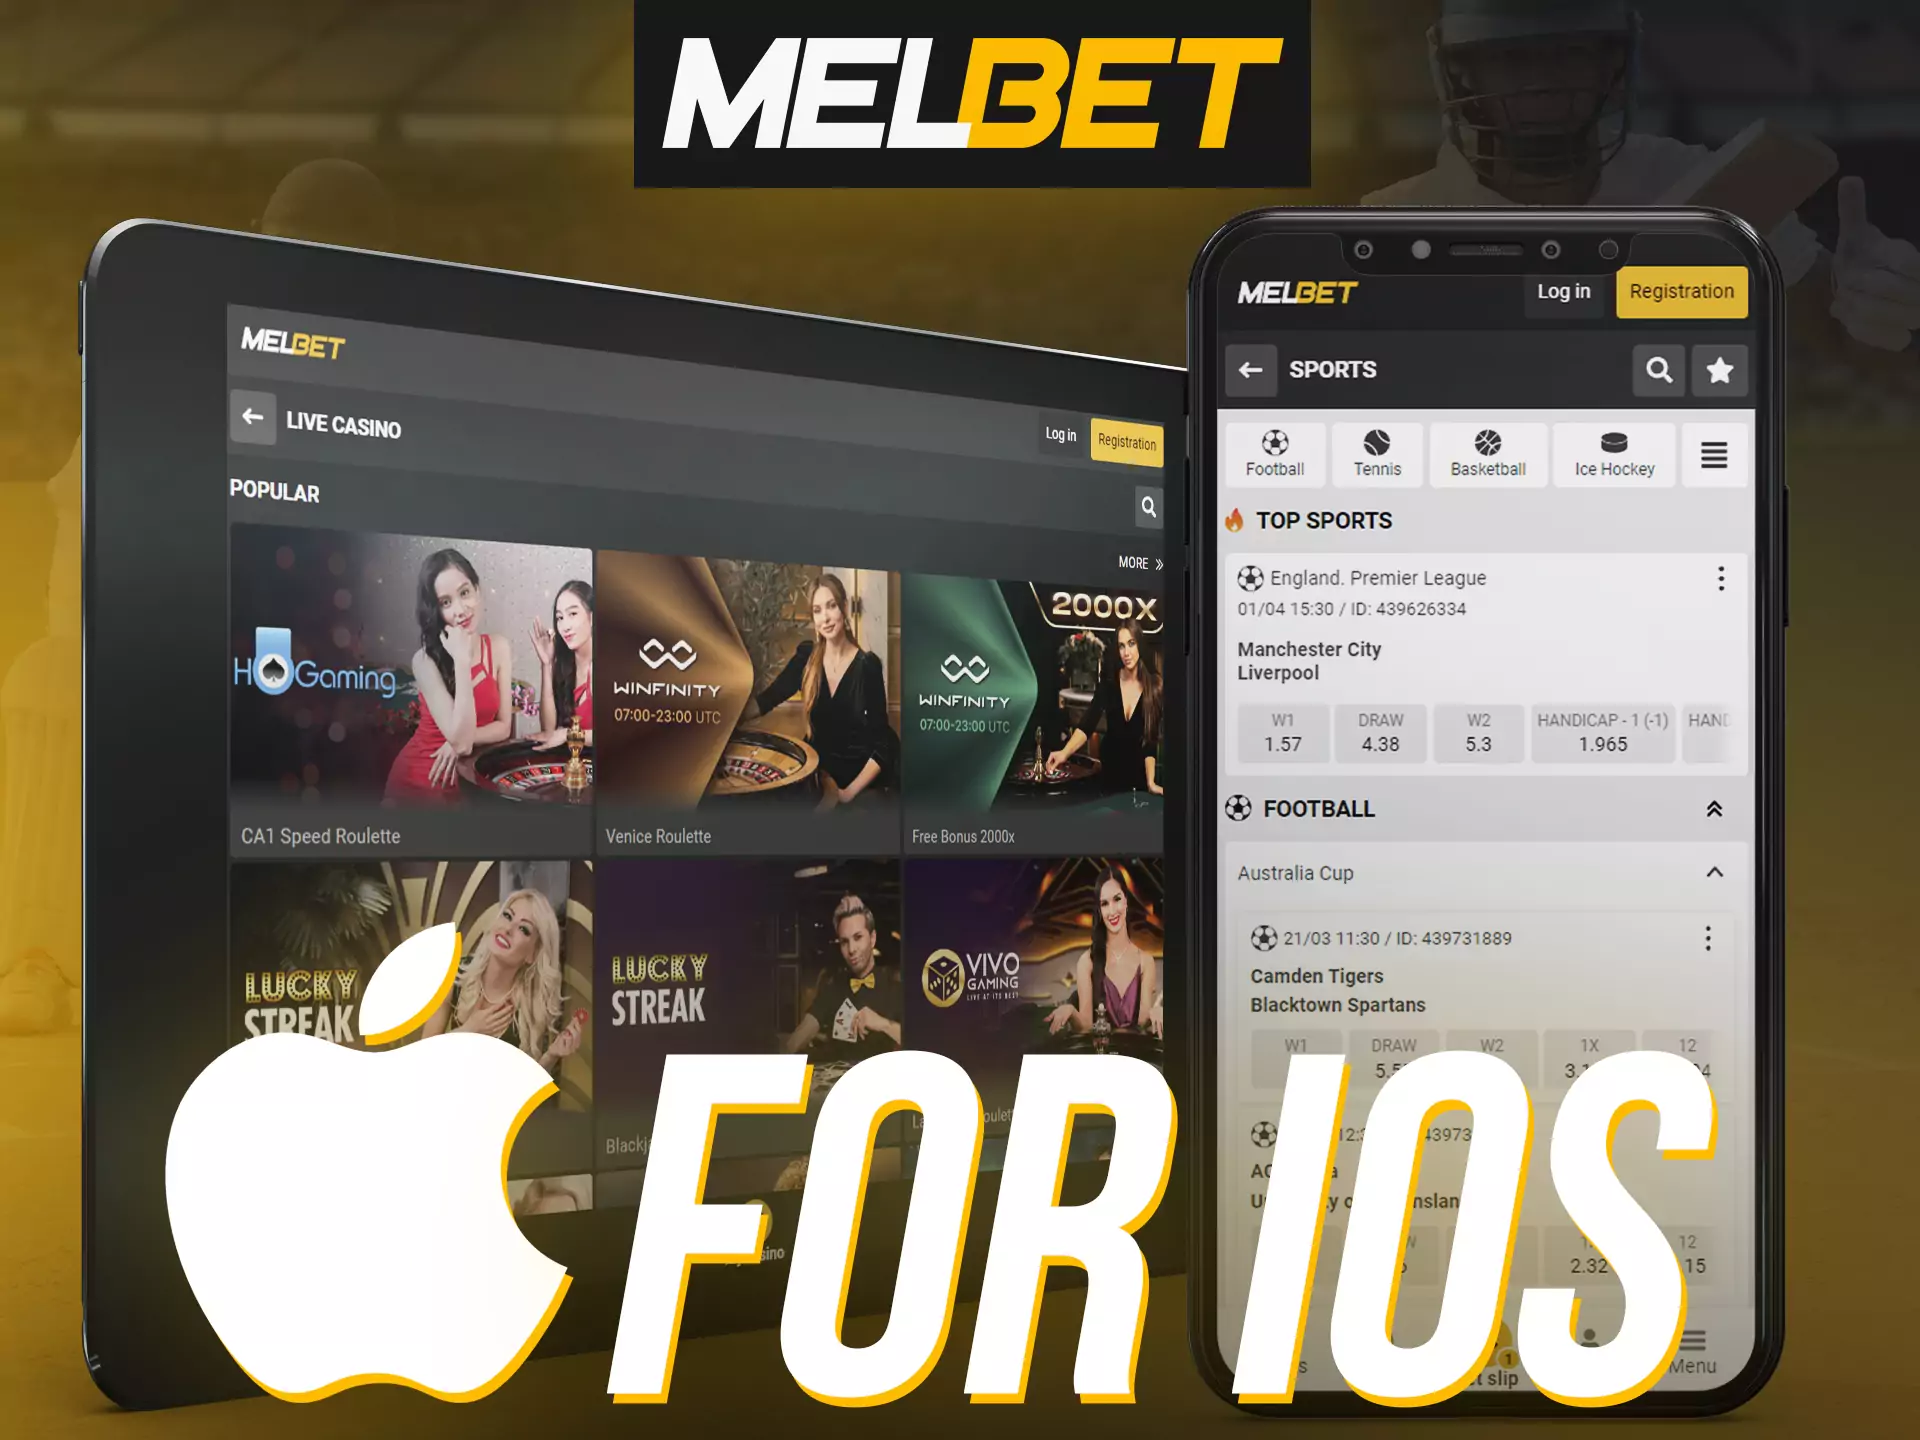 Use the Melbet app on your iOS device.